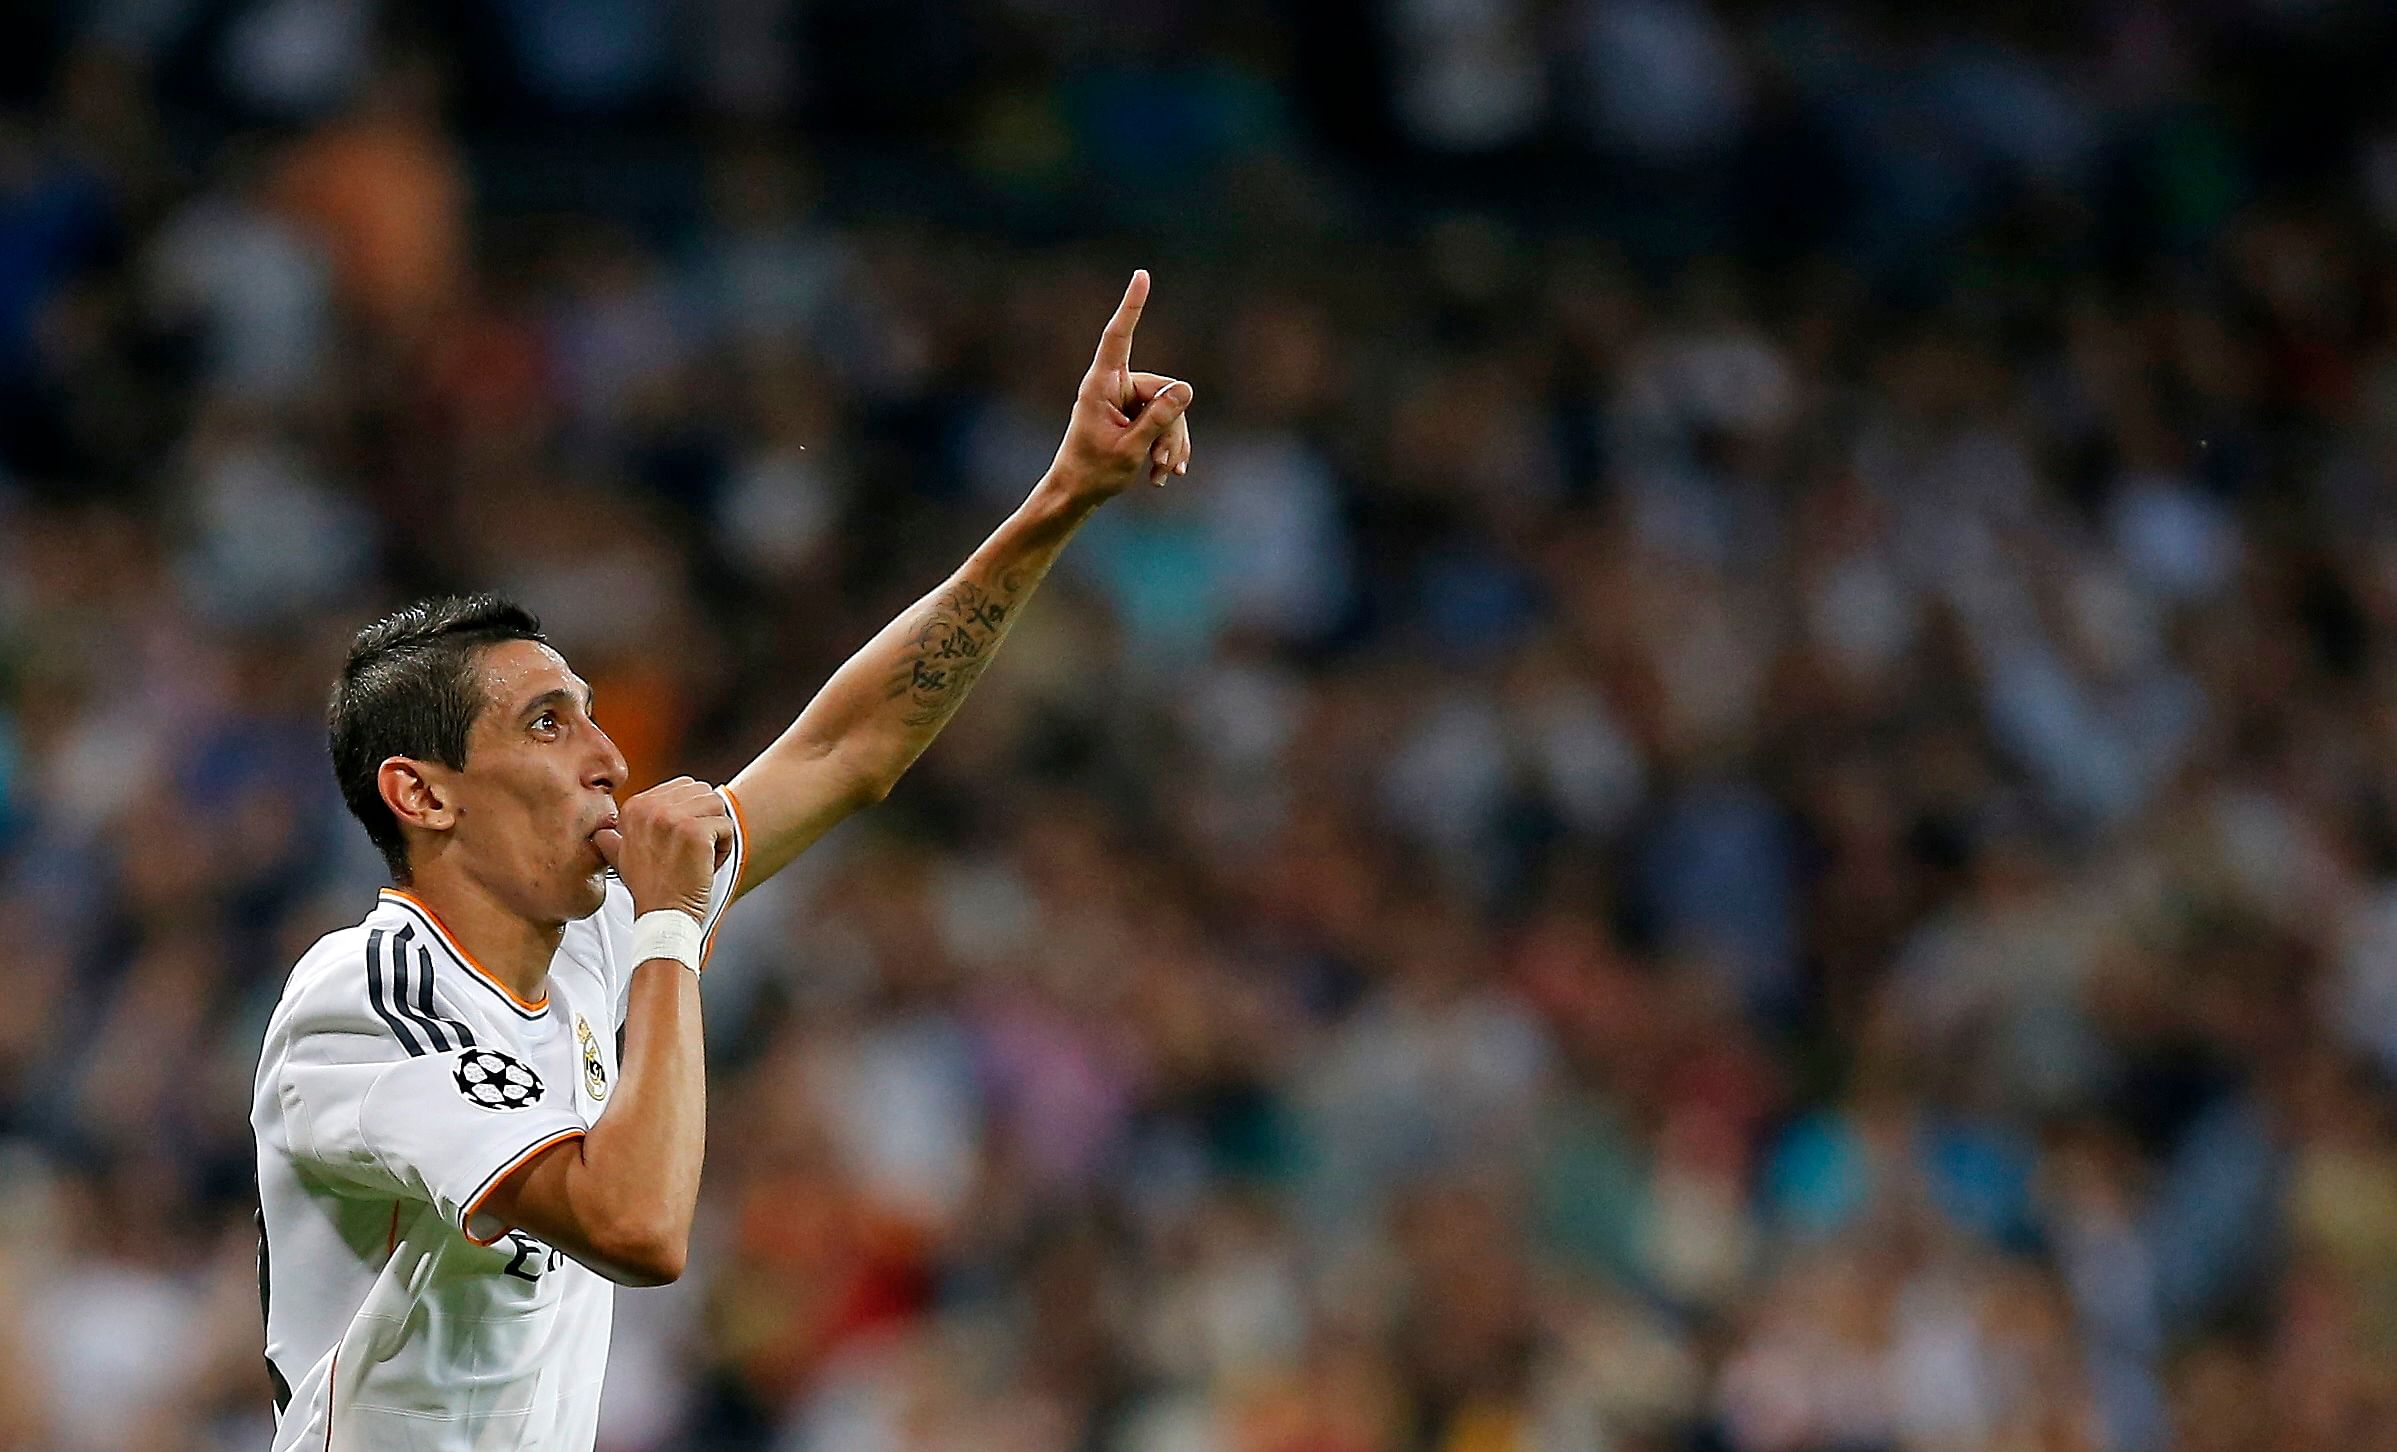 Real Madrid's Angel Di Maria celebrates his goal against FC Copenhagen during their Champions League soccer match at Bernabeu stadium in Madrid in this October 2, 2013 file photo. Manchester United smashed the British transfer record when they signed Argentina winger Angel Di Maria from Real Madrid for 59.7 million pounds on August 26, 2014. Picture taken October 2, 2013. REUTERS